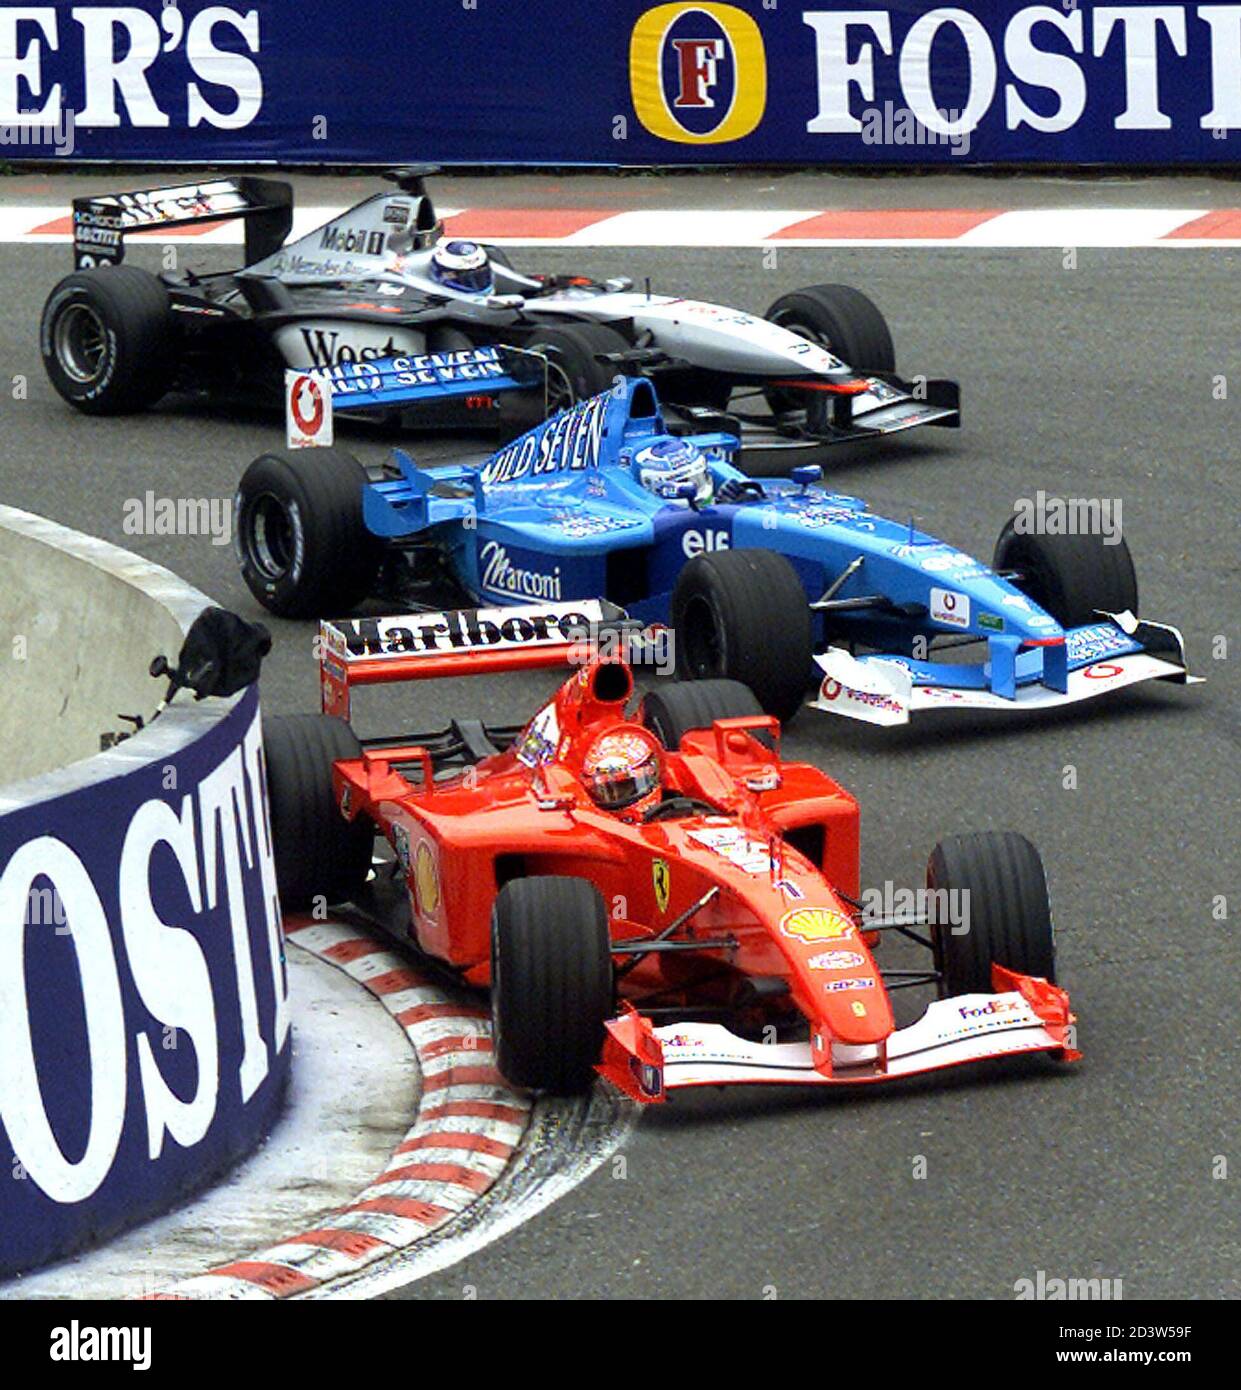 Germany's Ferrari driver Michael Schumacher (L) leads the race in front of  Italy's Benetton Renault Giancarlo Fisichella (C) and Scotland's McLaren  Mercedes driver David Coulthard (R) at the start of the Belgian